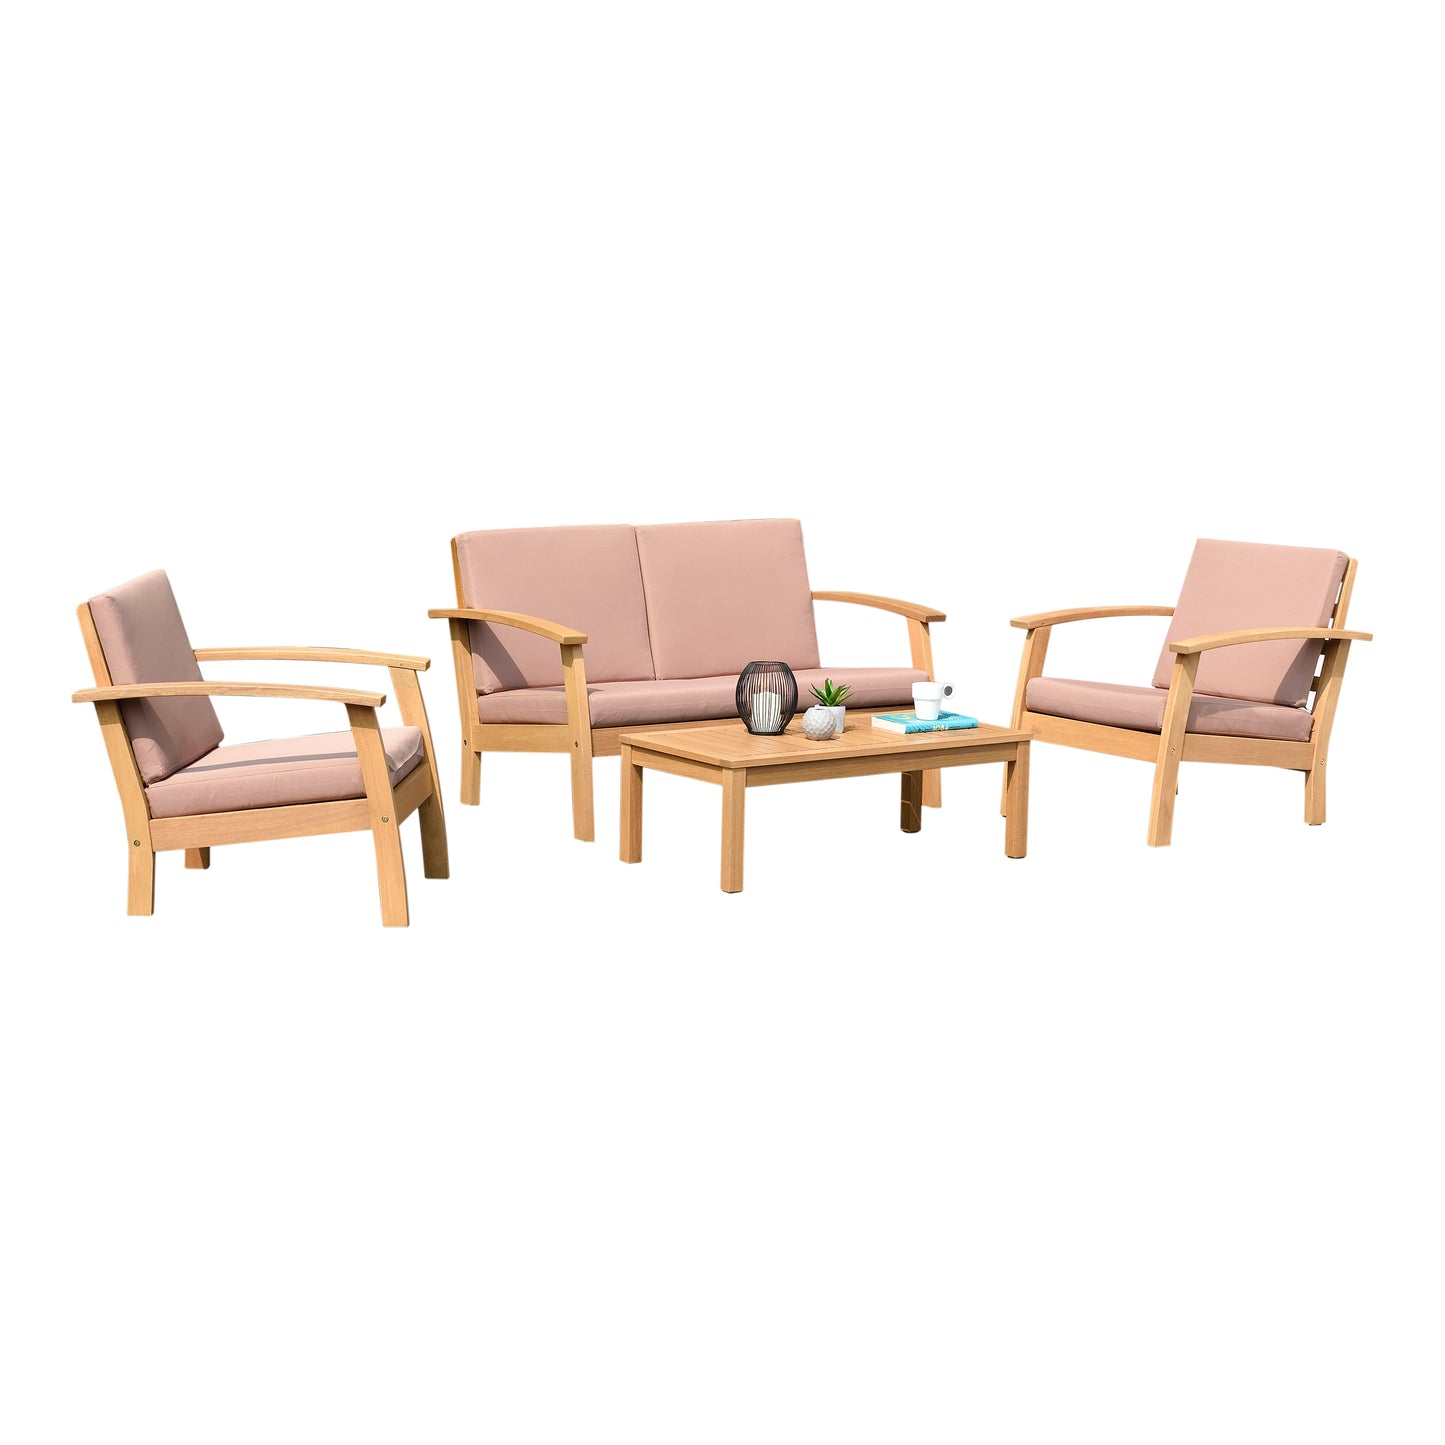 Kingsbury Teak Finish 100% FSC Certified Solid Wood With Pink Cushion Seating Set